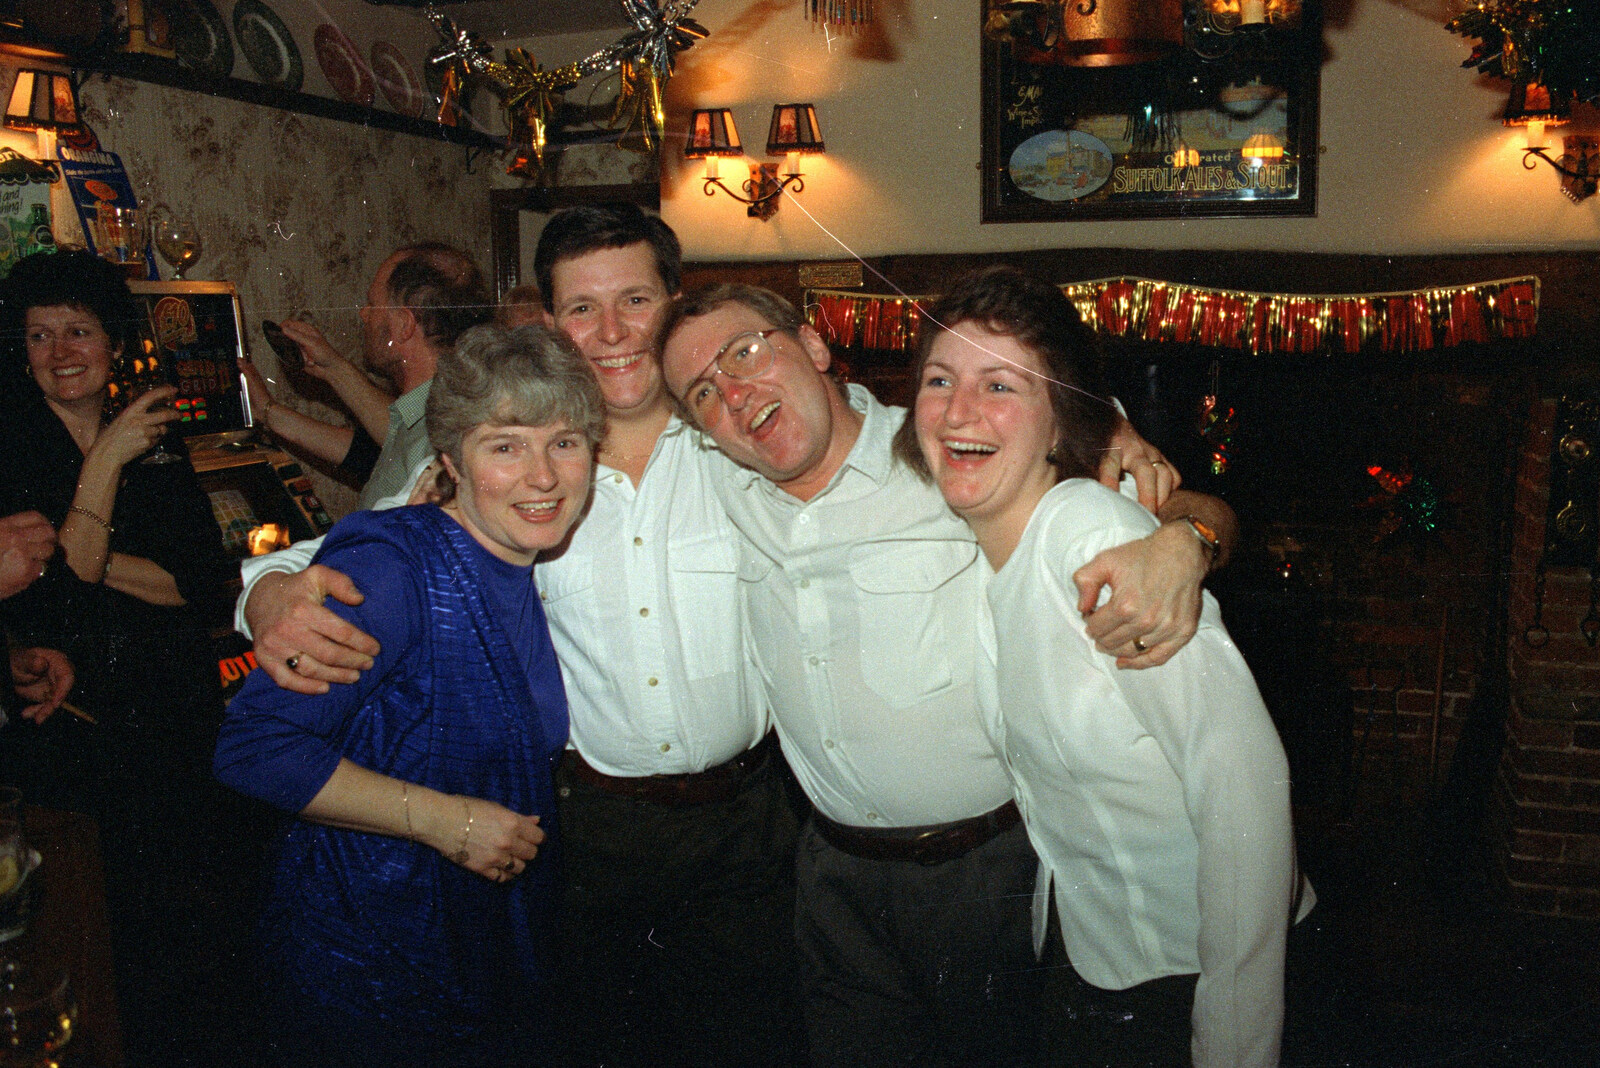 Spam, Barry, John Willy and Davina from New Year's Eve at the Swan Inn, Brome, Suffolk - 31st December 1991